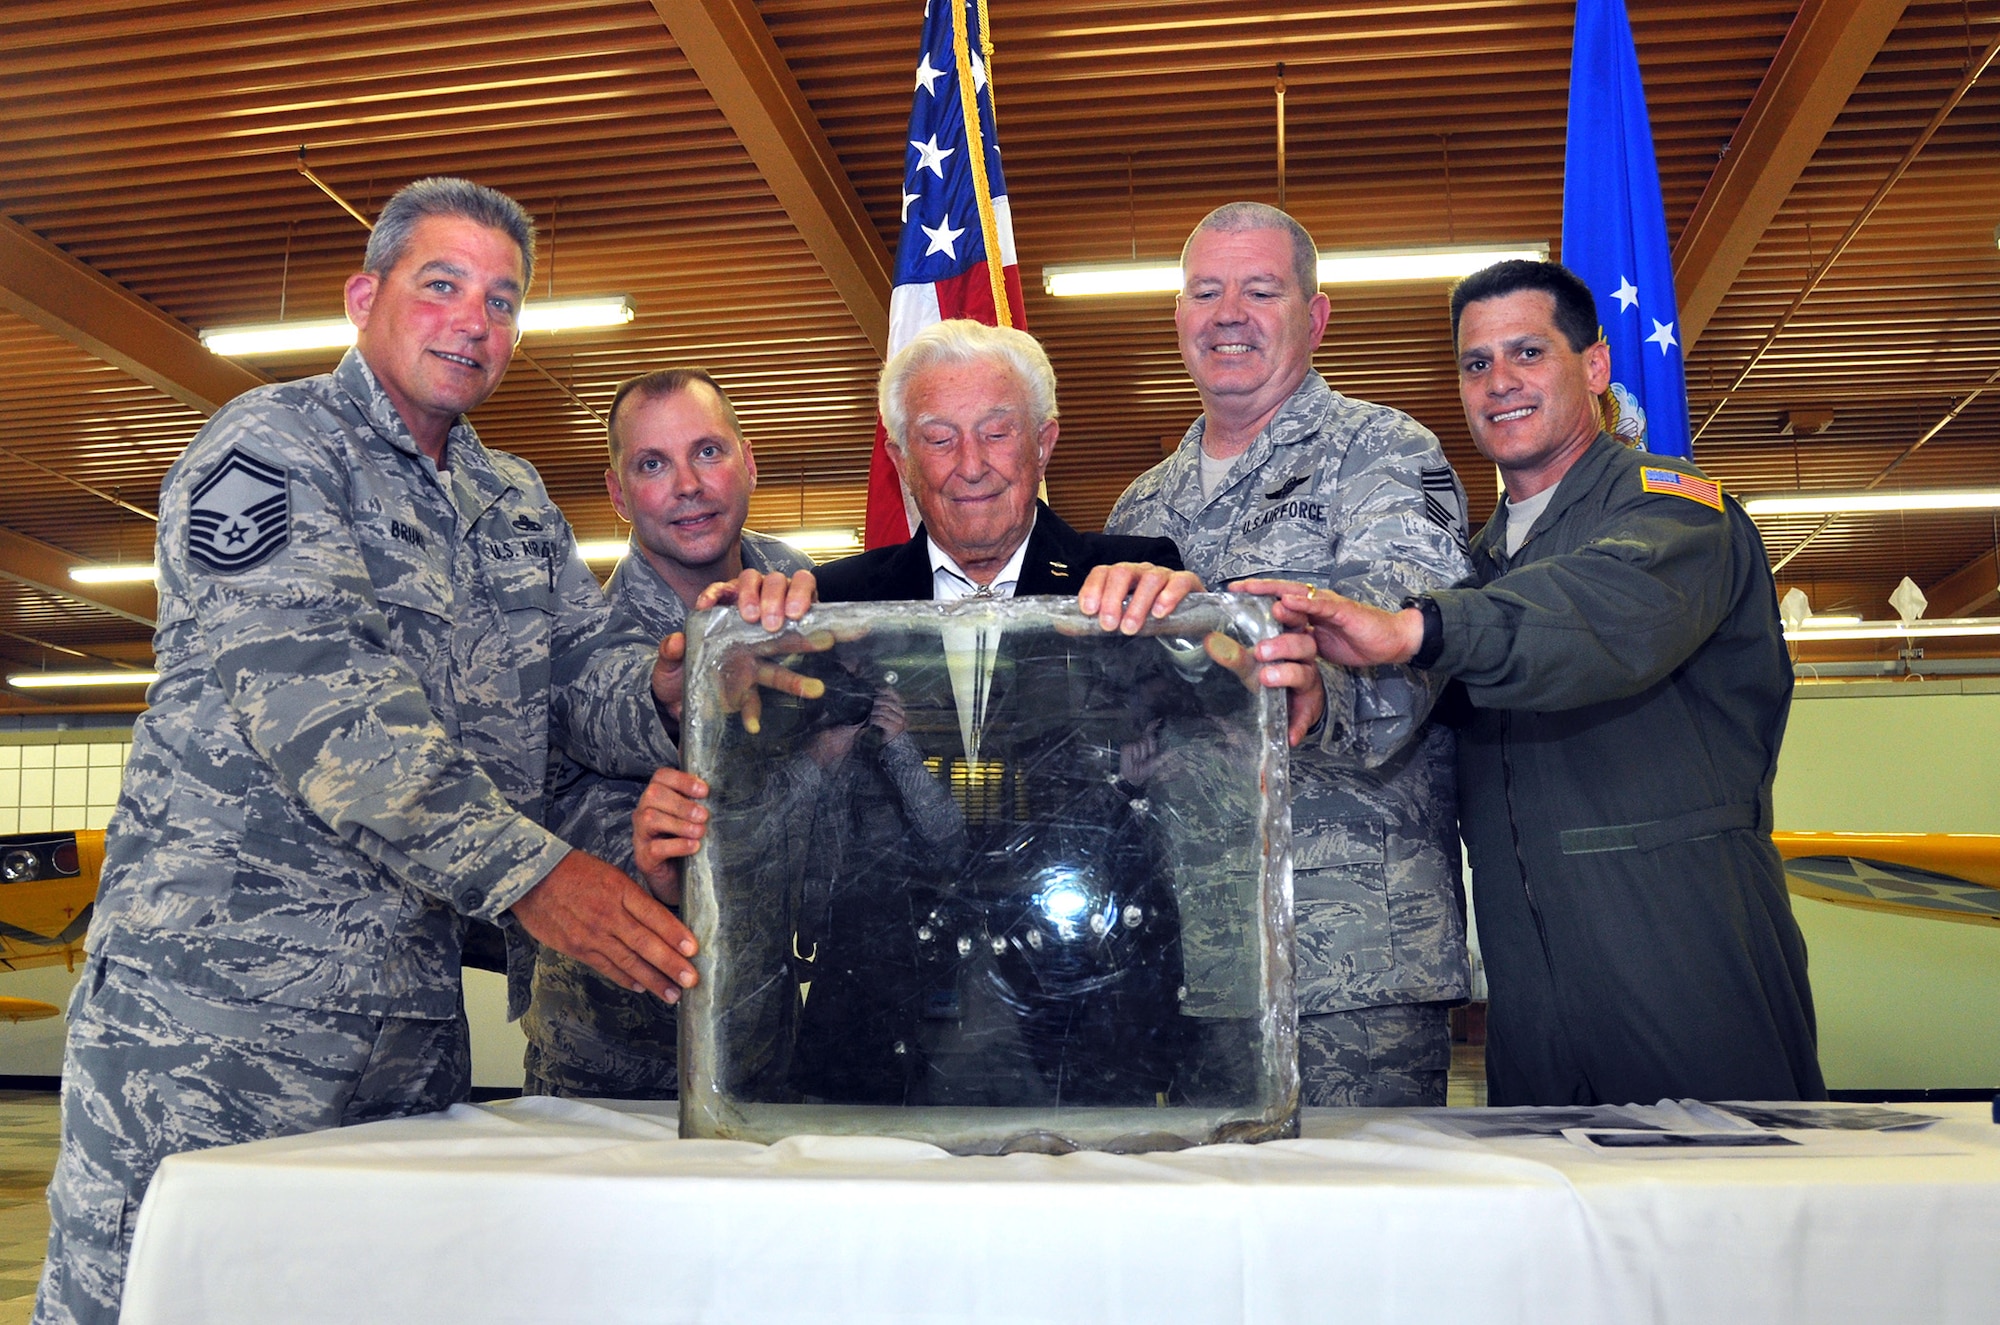 Members of the 70th and 79th Air Refueling Squadrons presented Bruce Sooy with a B-24 windshield at the Travis Air Force Base Heritage Center, April 8, 2014. (U.S. Air Force photo/Staff Sgt. Cindy G. Alejandrez)